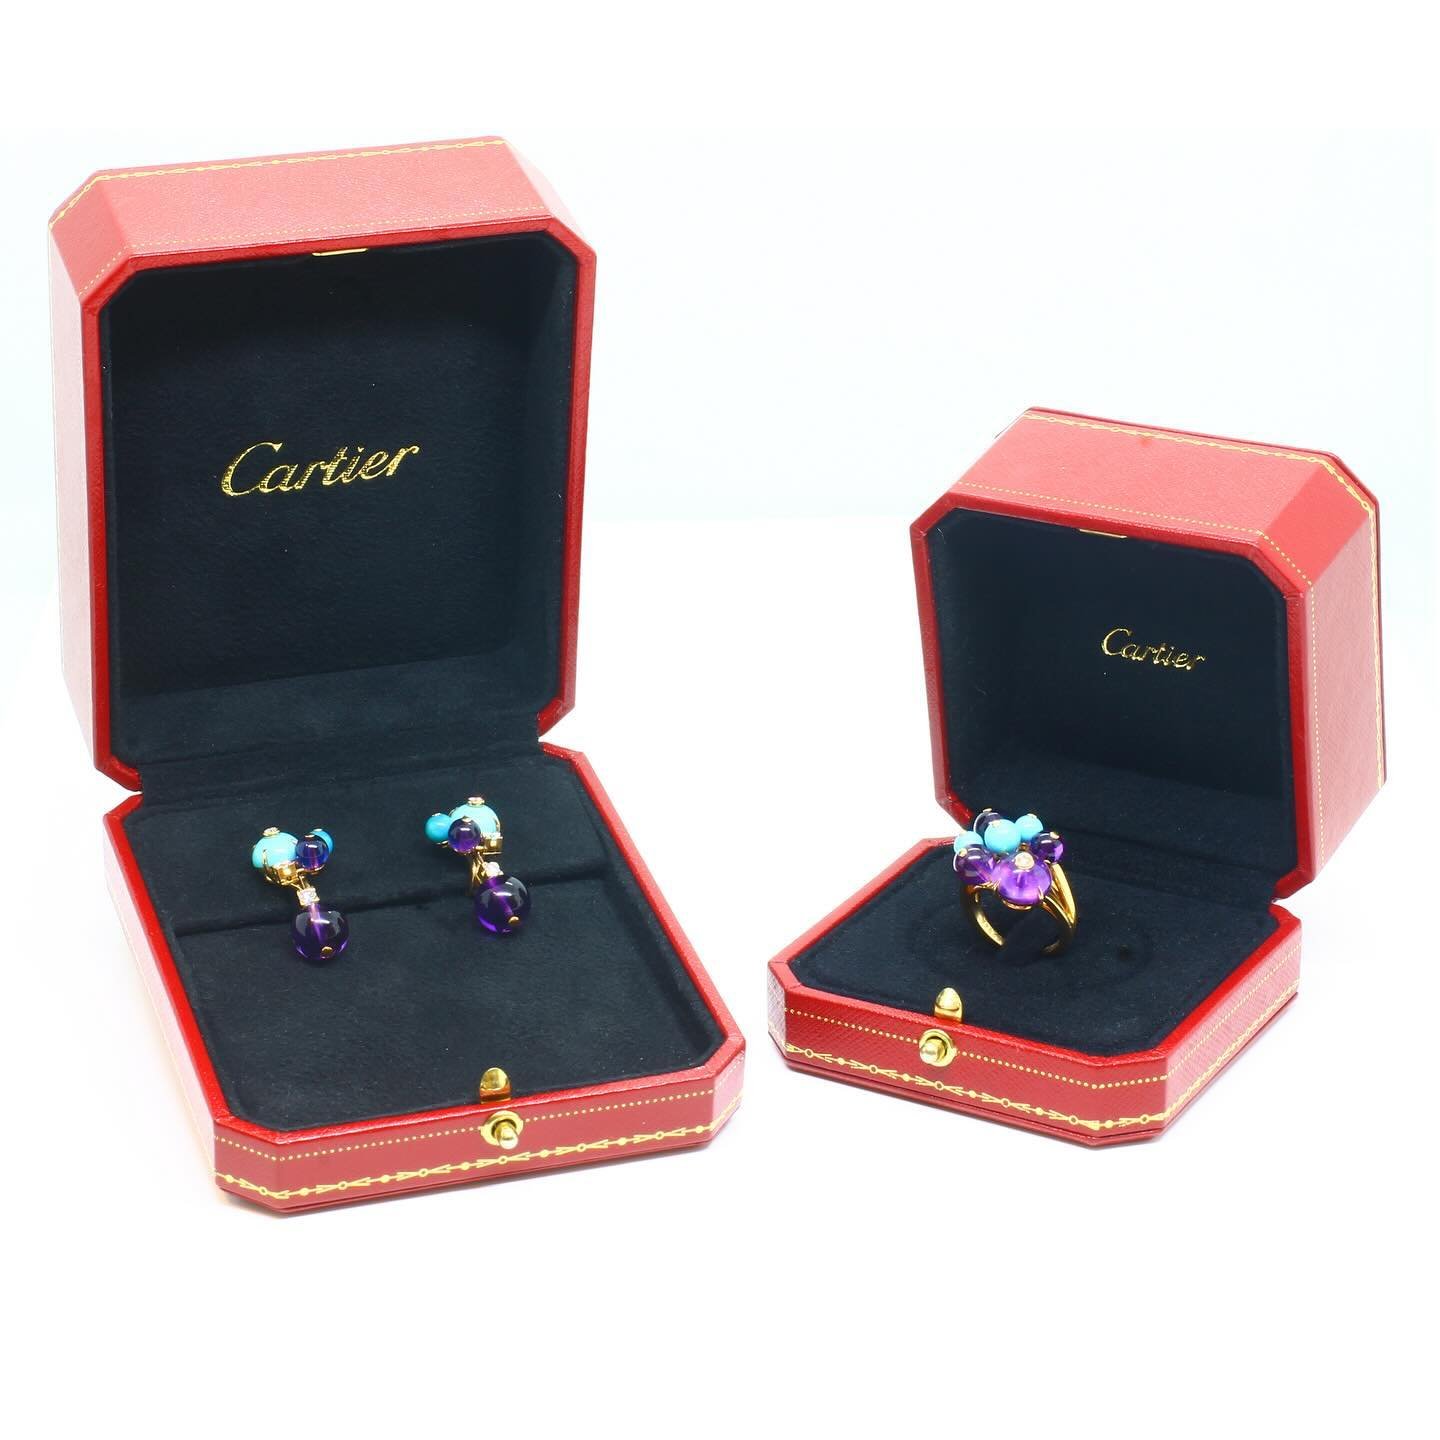 Vintage Cartier Les Delices De Goa ring and earring suite mounted in 18ct yellow gold. With original Cartier certificate. Circa 2000 #cartier #cartierjewellery #cartierring #cartierearrings #vintagecartier #antiquejewellery #vintagejewellery #vintage